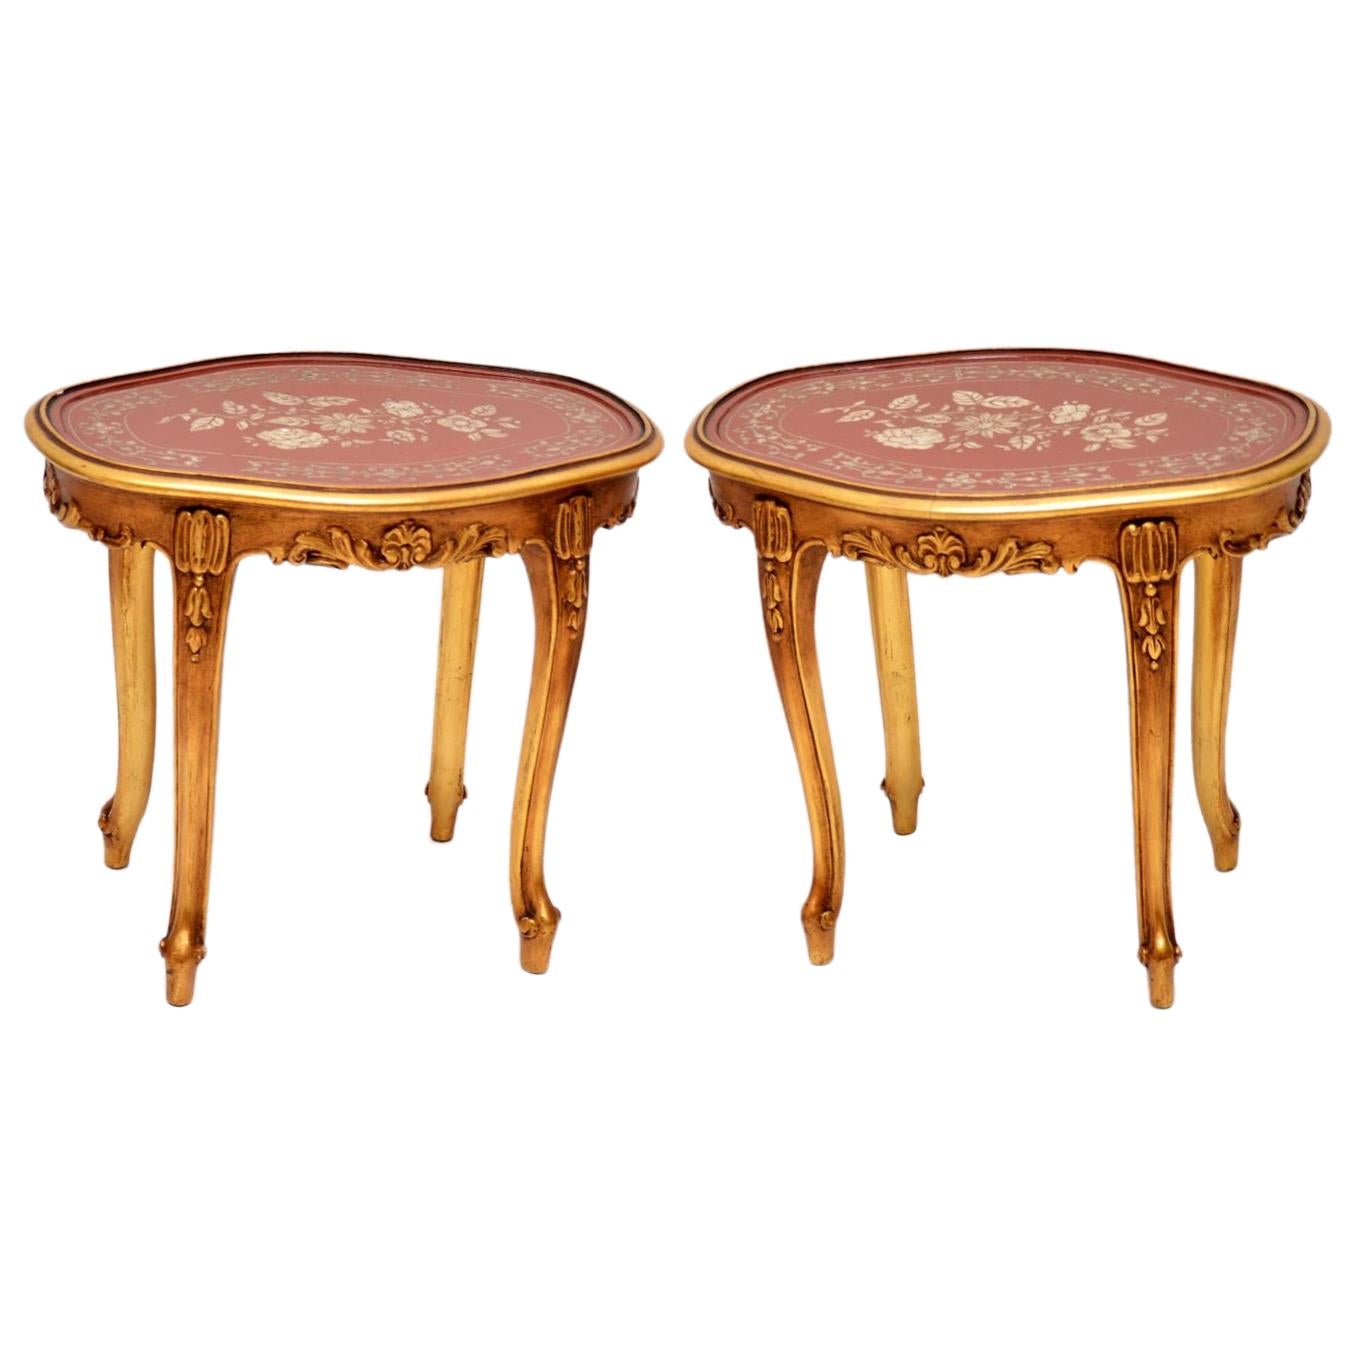 This pair of antique French style gilt wood & lacquered side tables do have a matching coffee table to go with them. However, I can’t predict if either item will sell individually. The tops have a red lacquered background with floral decoration. The